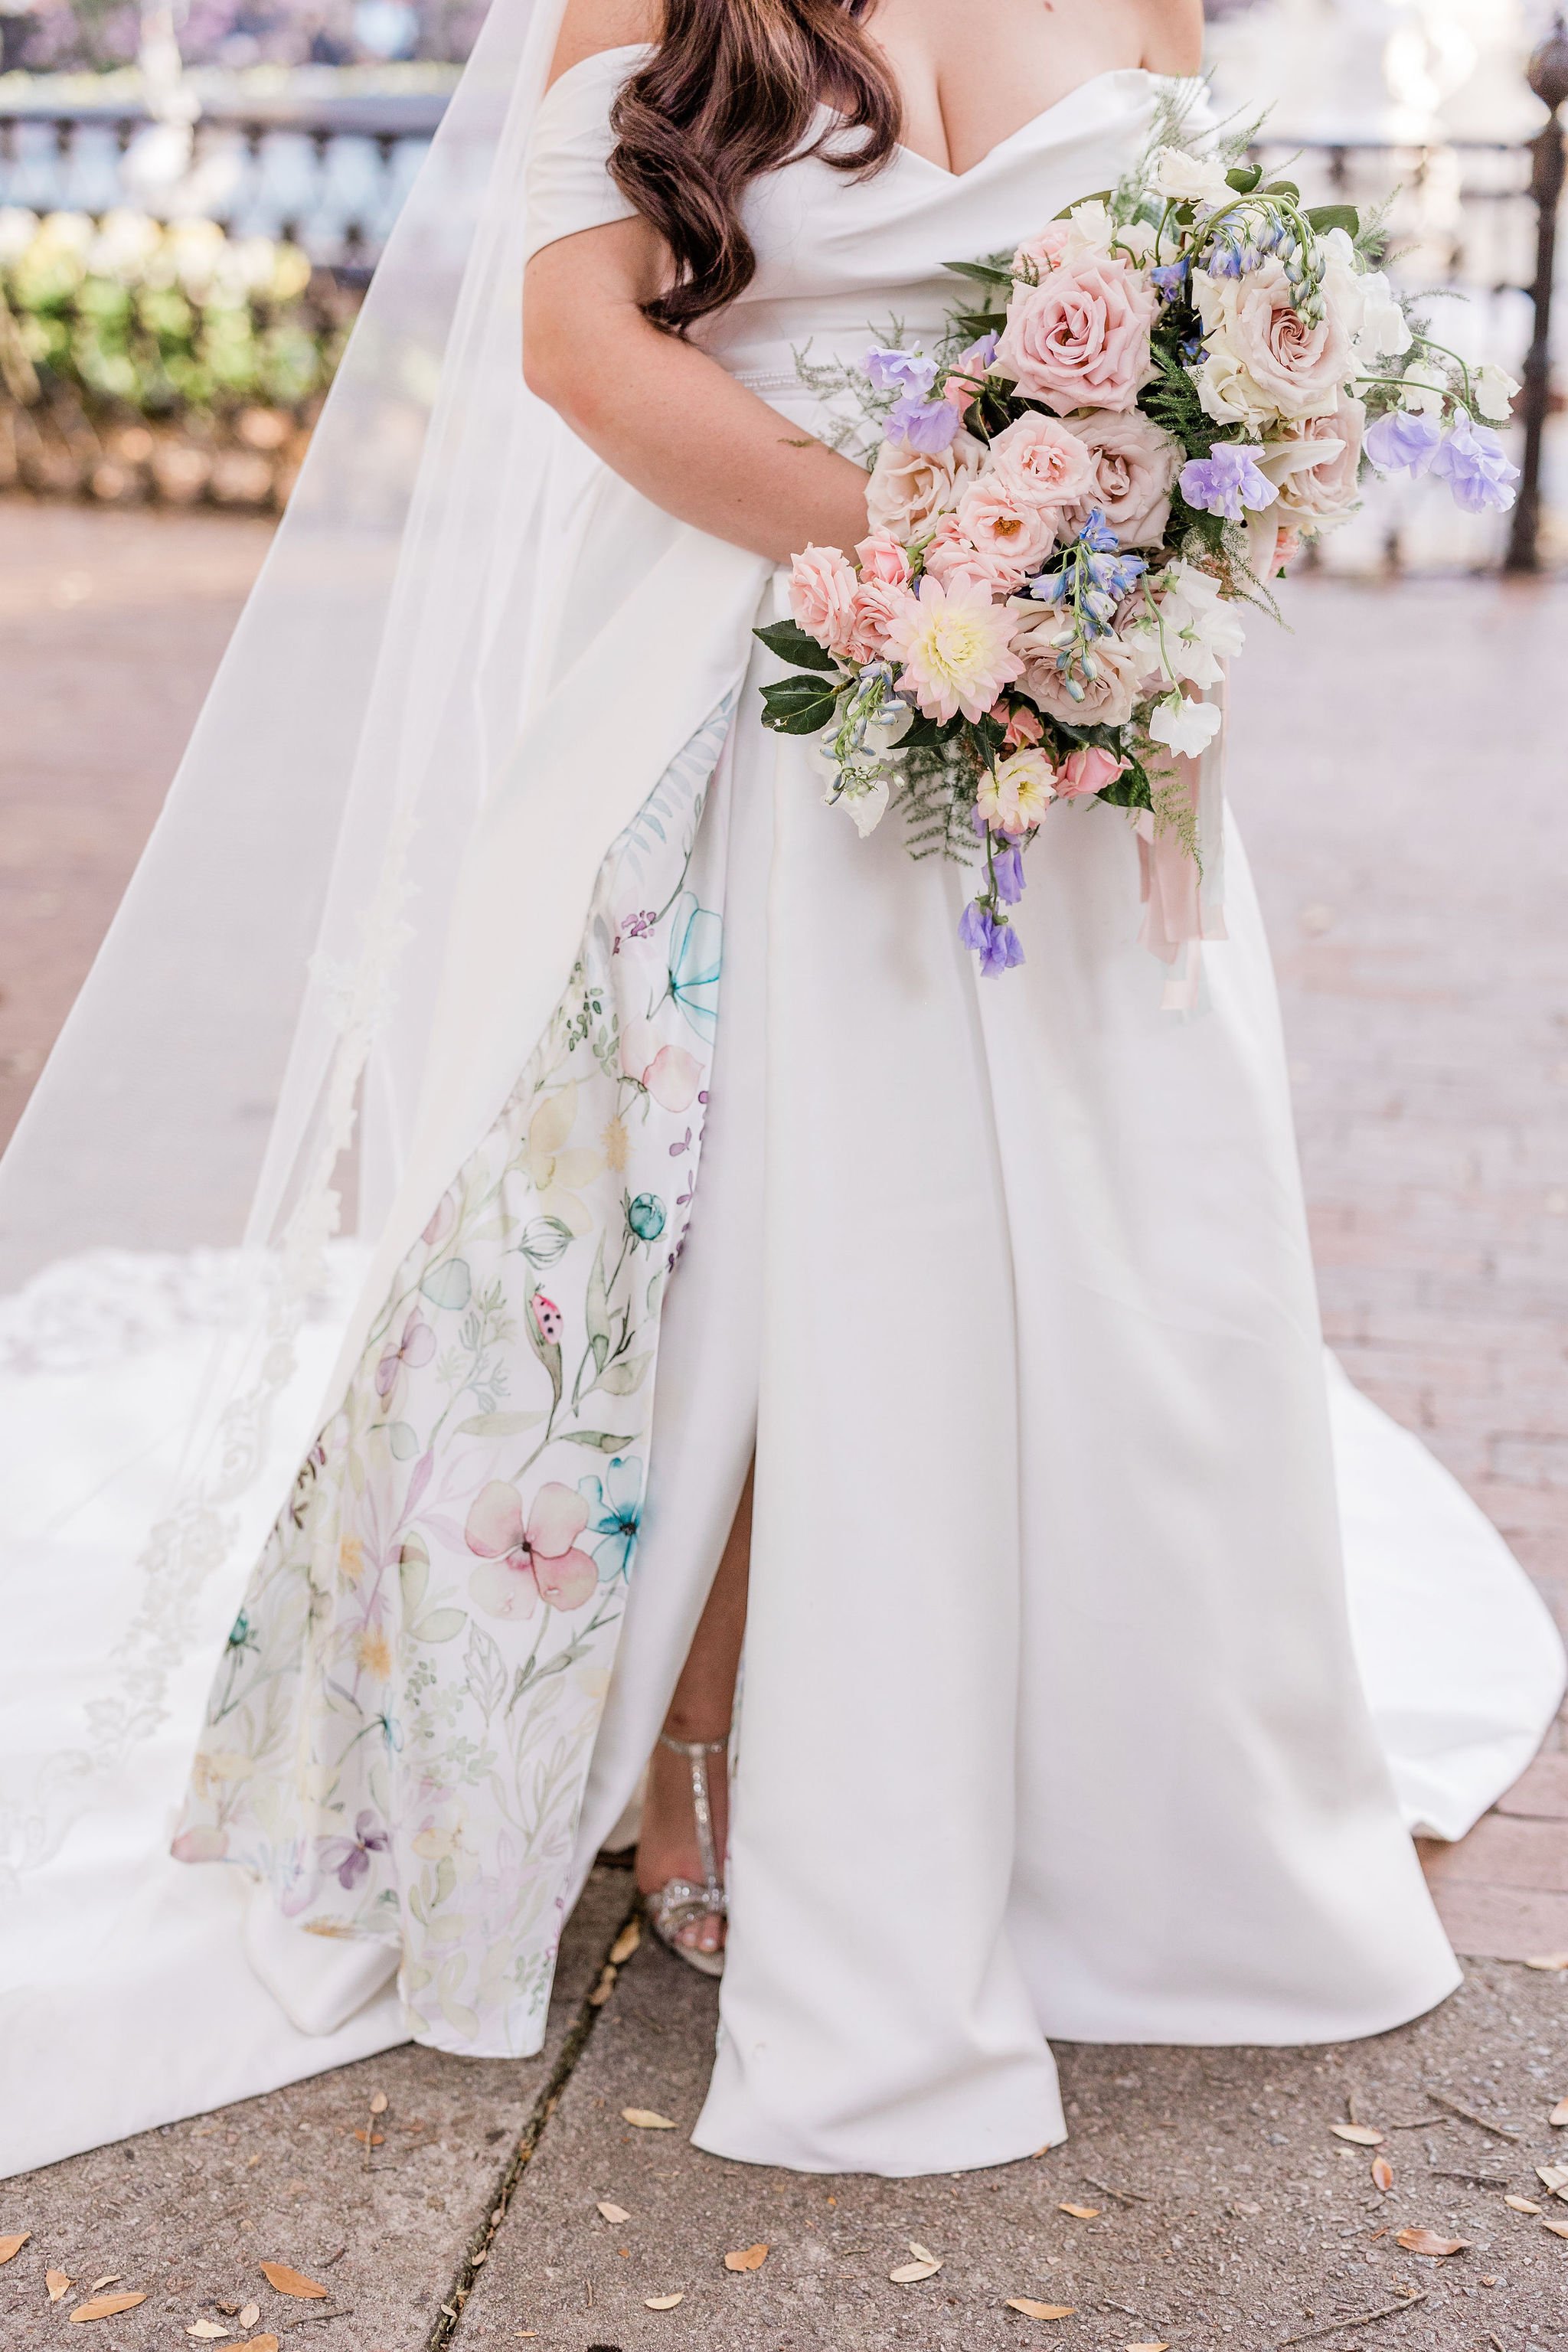 Victoria-and-stuarts-pastel-spring-wedding-at-the-forsyth-park-fountain-and-the-mansion-on-forsyth-in-savannah-georgia-planned-by-savannah-wedding-planner-and-savannah-wedding-florist-ivory-and-beau-5.JPG